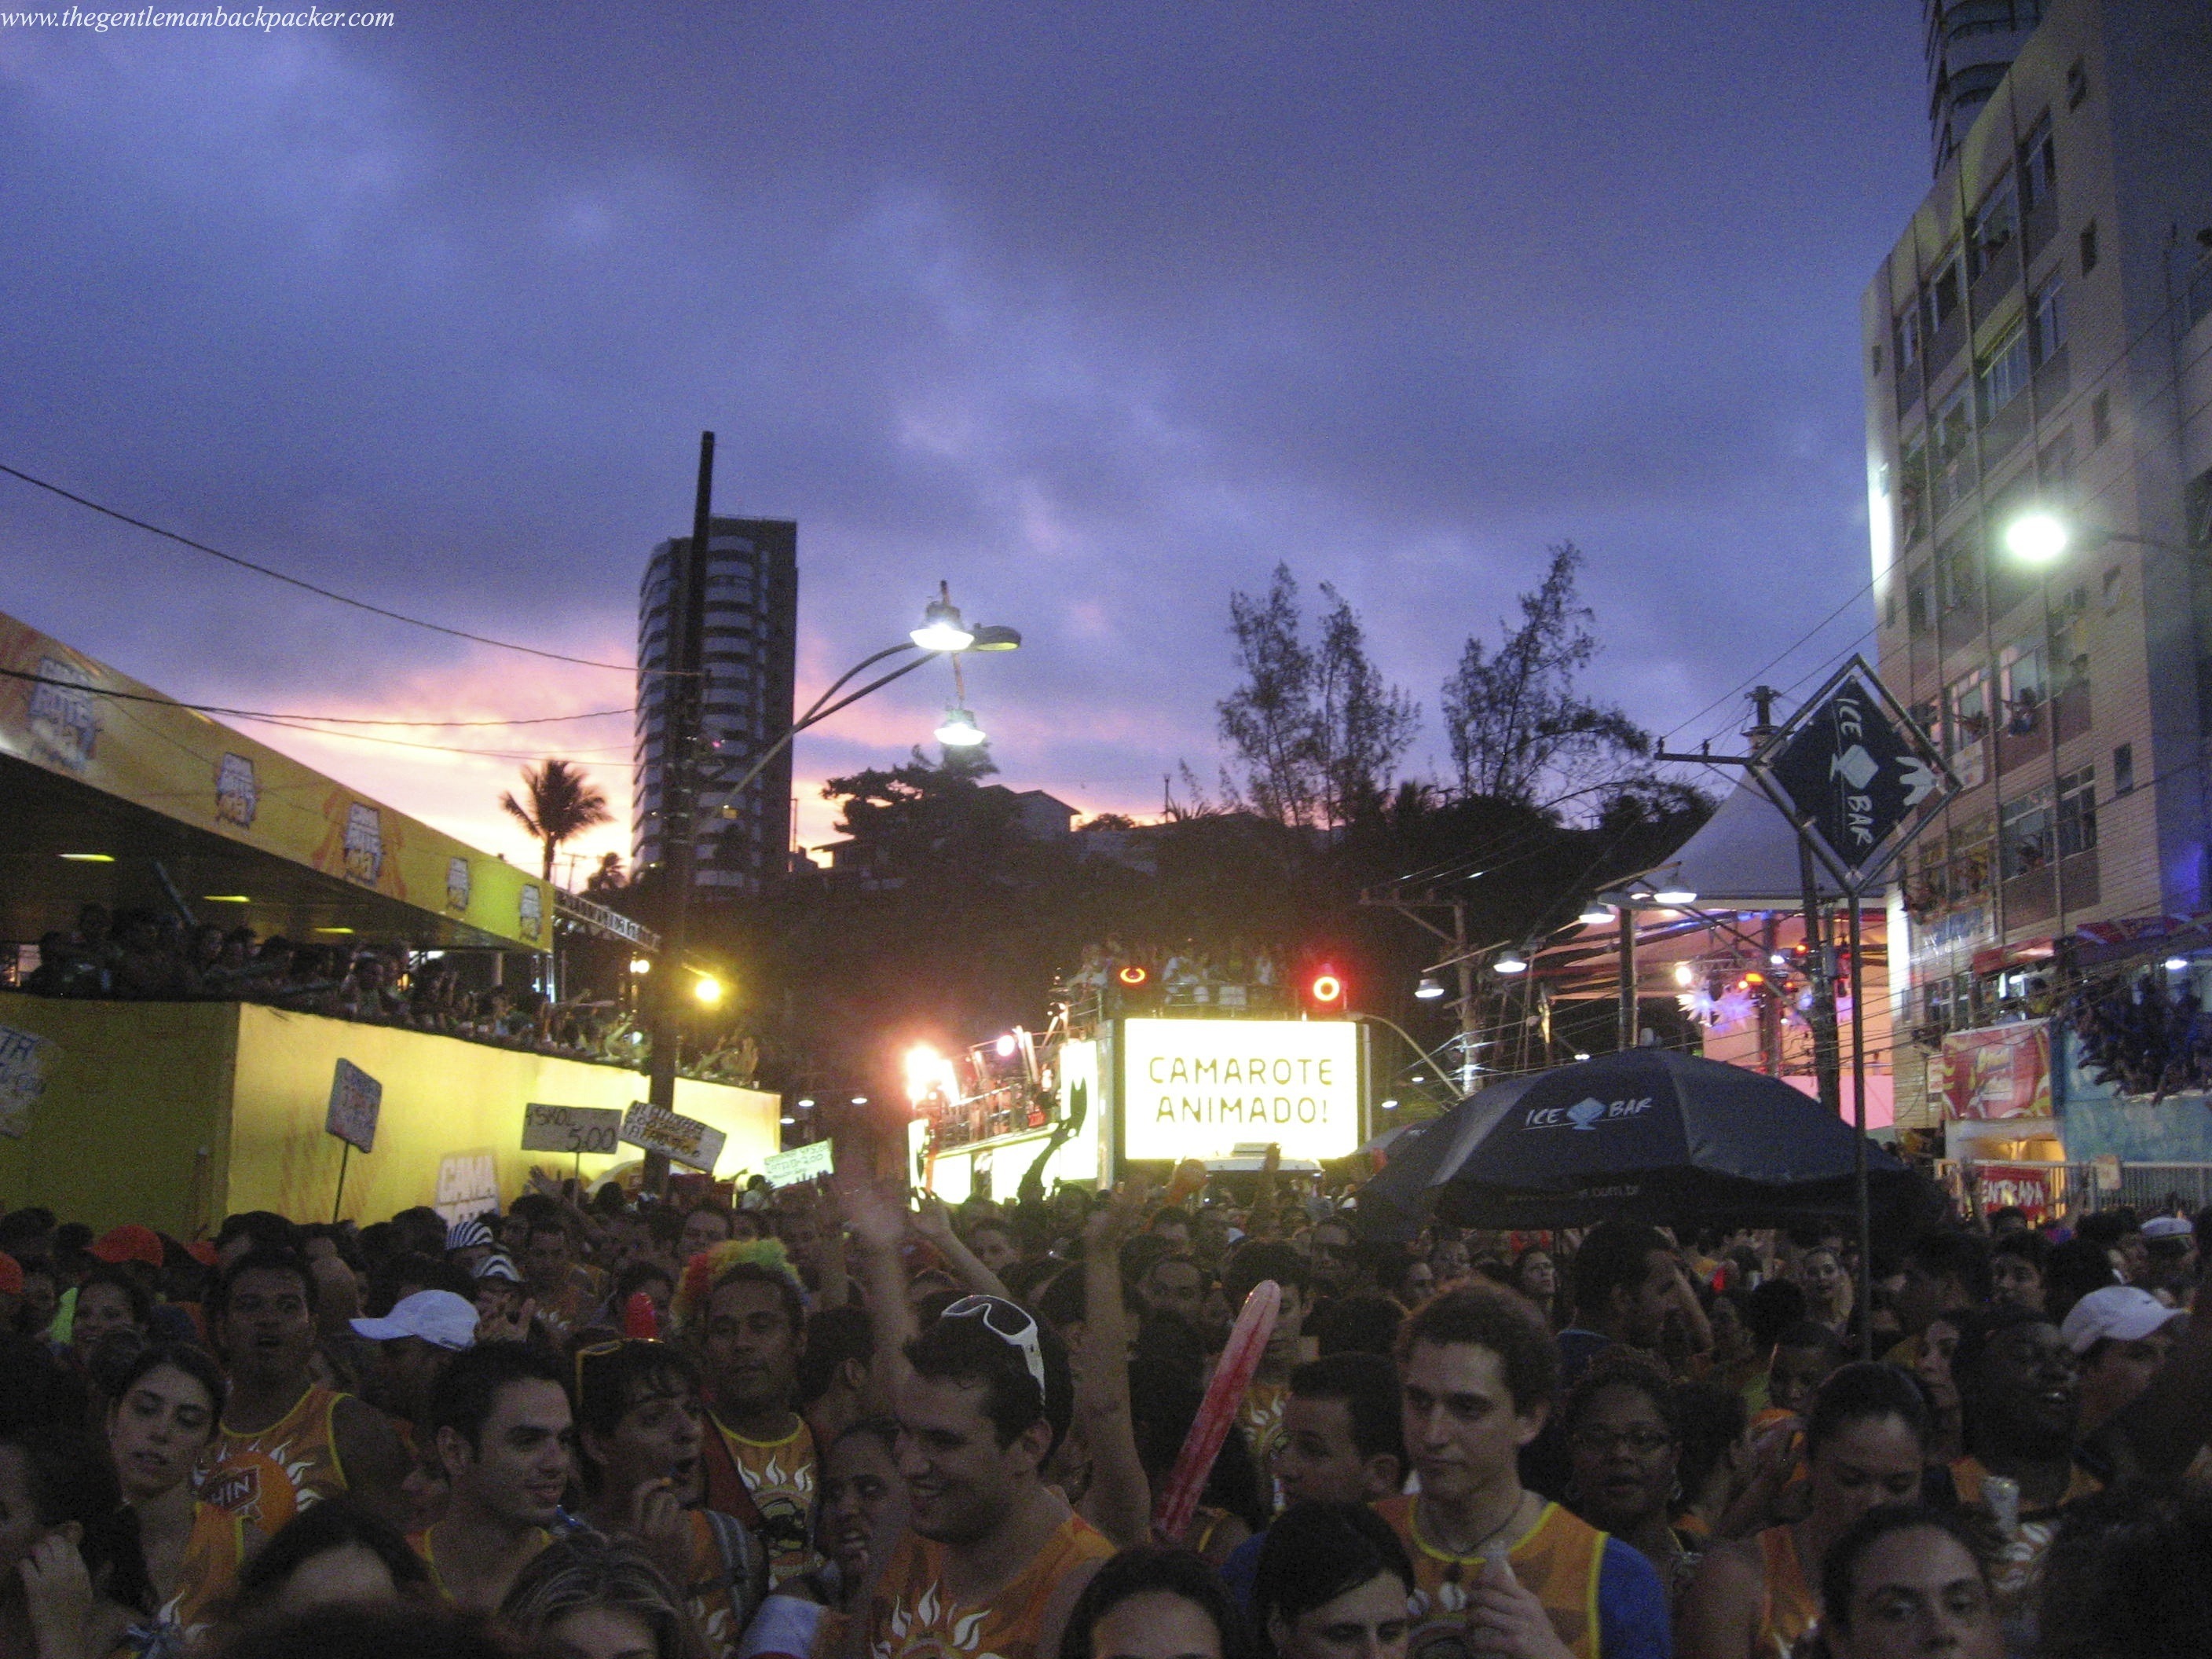 Sunset on Sunday, with Ivete Sangalo as we approach the finish line